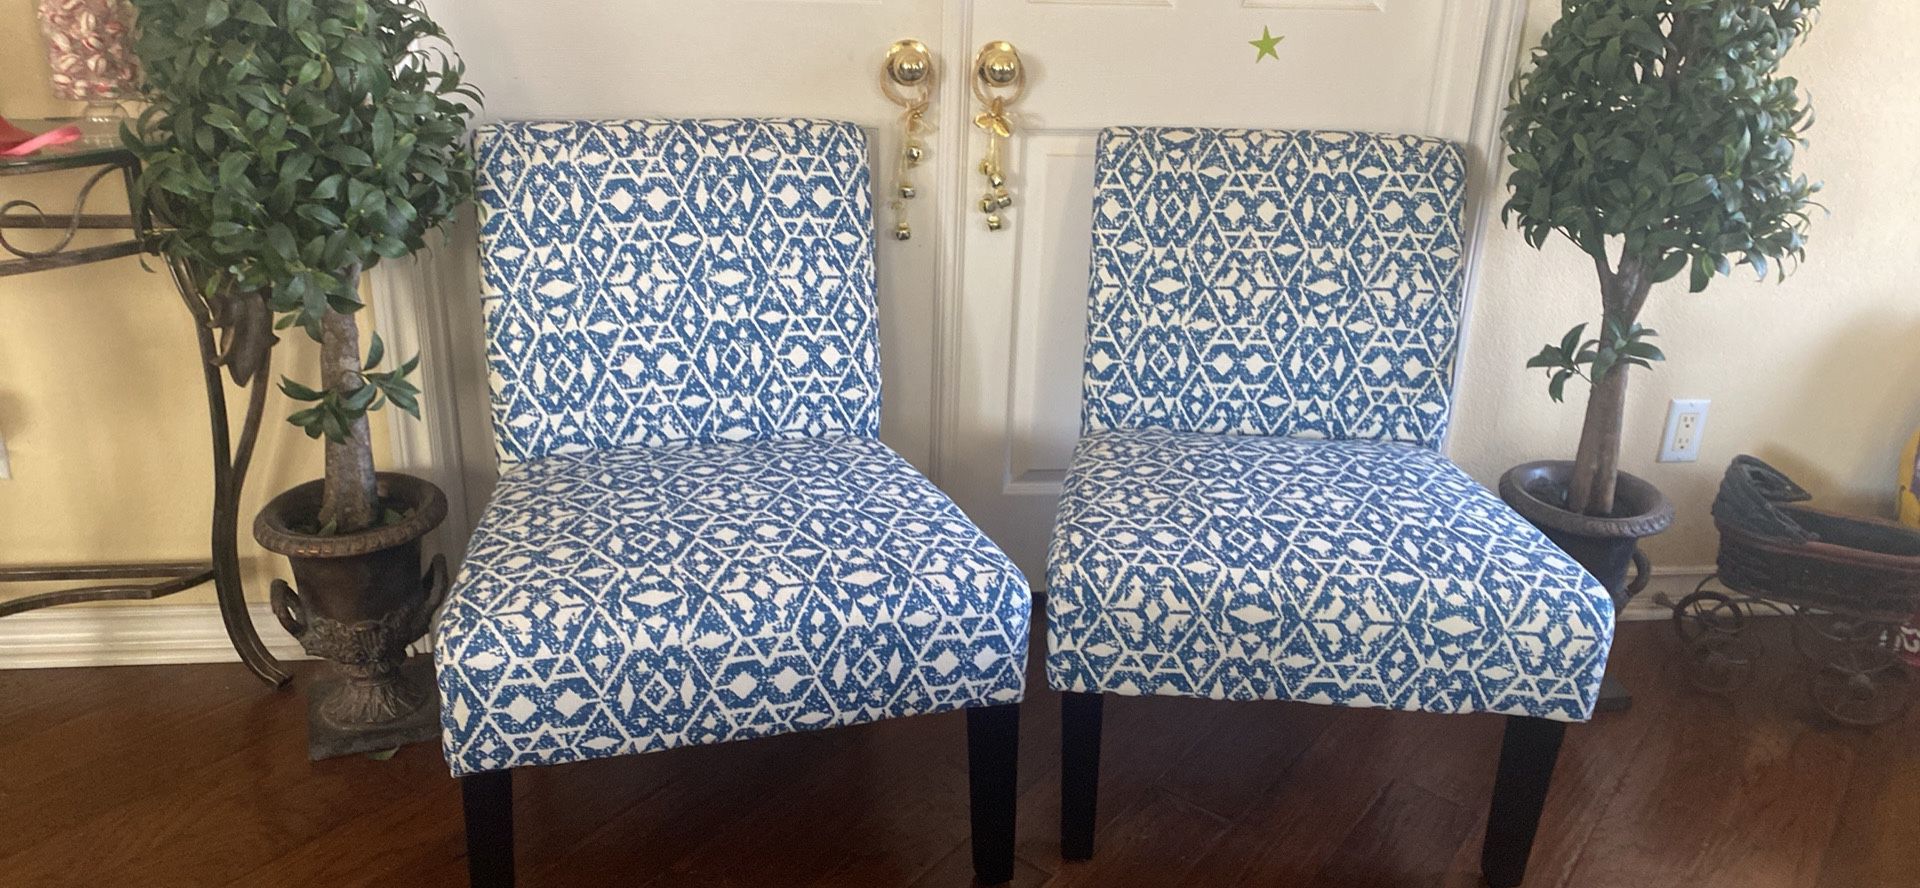 Oversized, Chairs, Blue, And White Fabric 